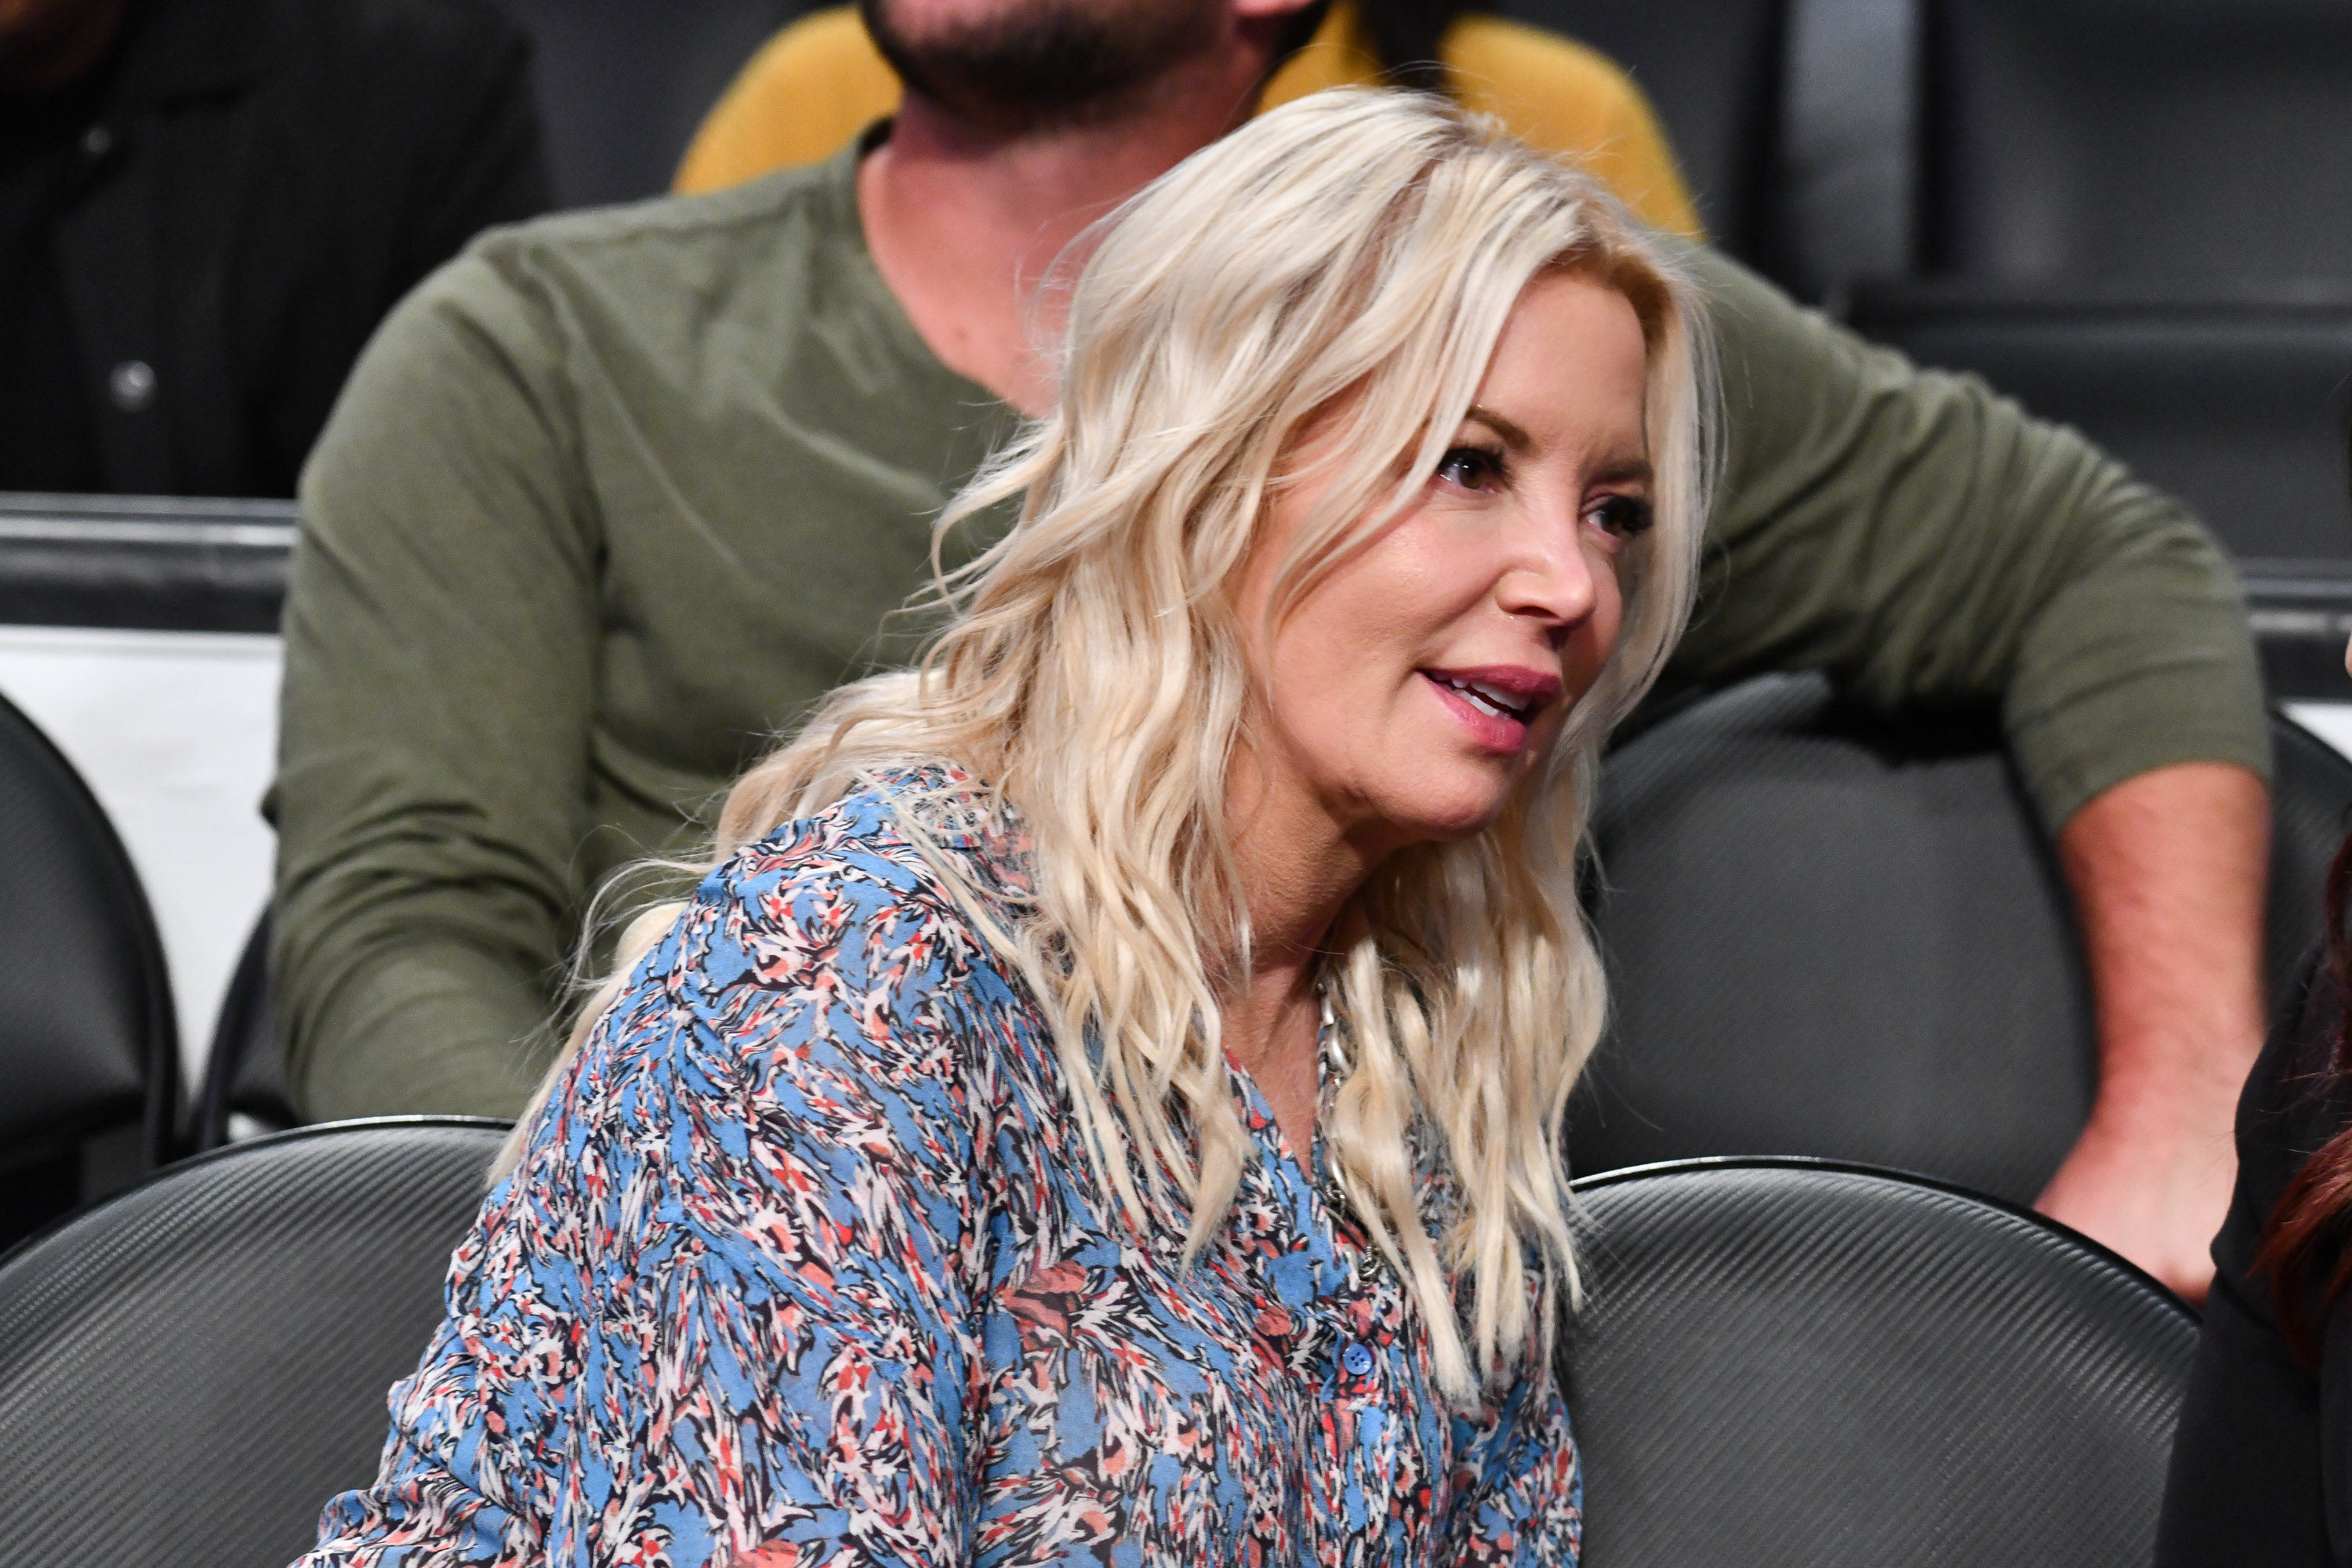 Los Angeles Lakers owner Jeanie Buss, an executive producer on an upcoming Lakers documentary, attends a basketball game between the  Lakers and the Toronto Raptors at Staples Center on November 10, 2019 in Los Angeles, California. (Allen Berezovsky—Getty Images)